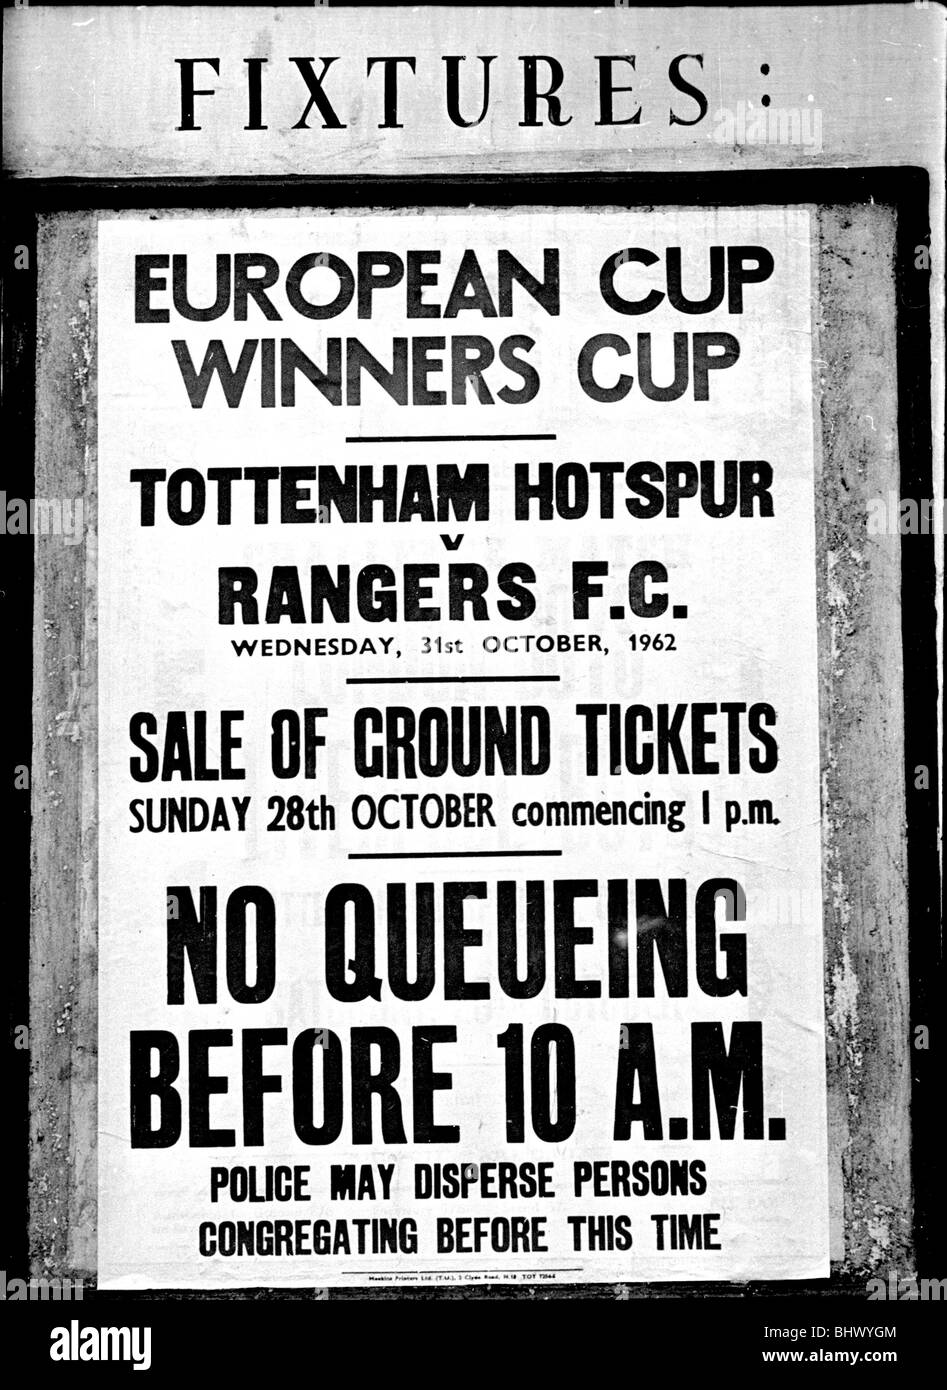 Fixtures notice advertising the sale of  tickets for Tottenham Hotspur v Rangers  European Cup Winners Cup match October 1962 Stock Photo